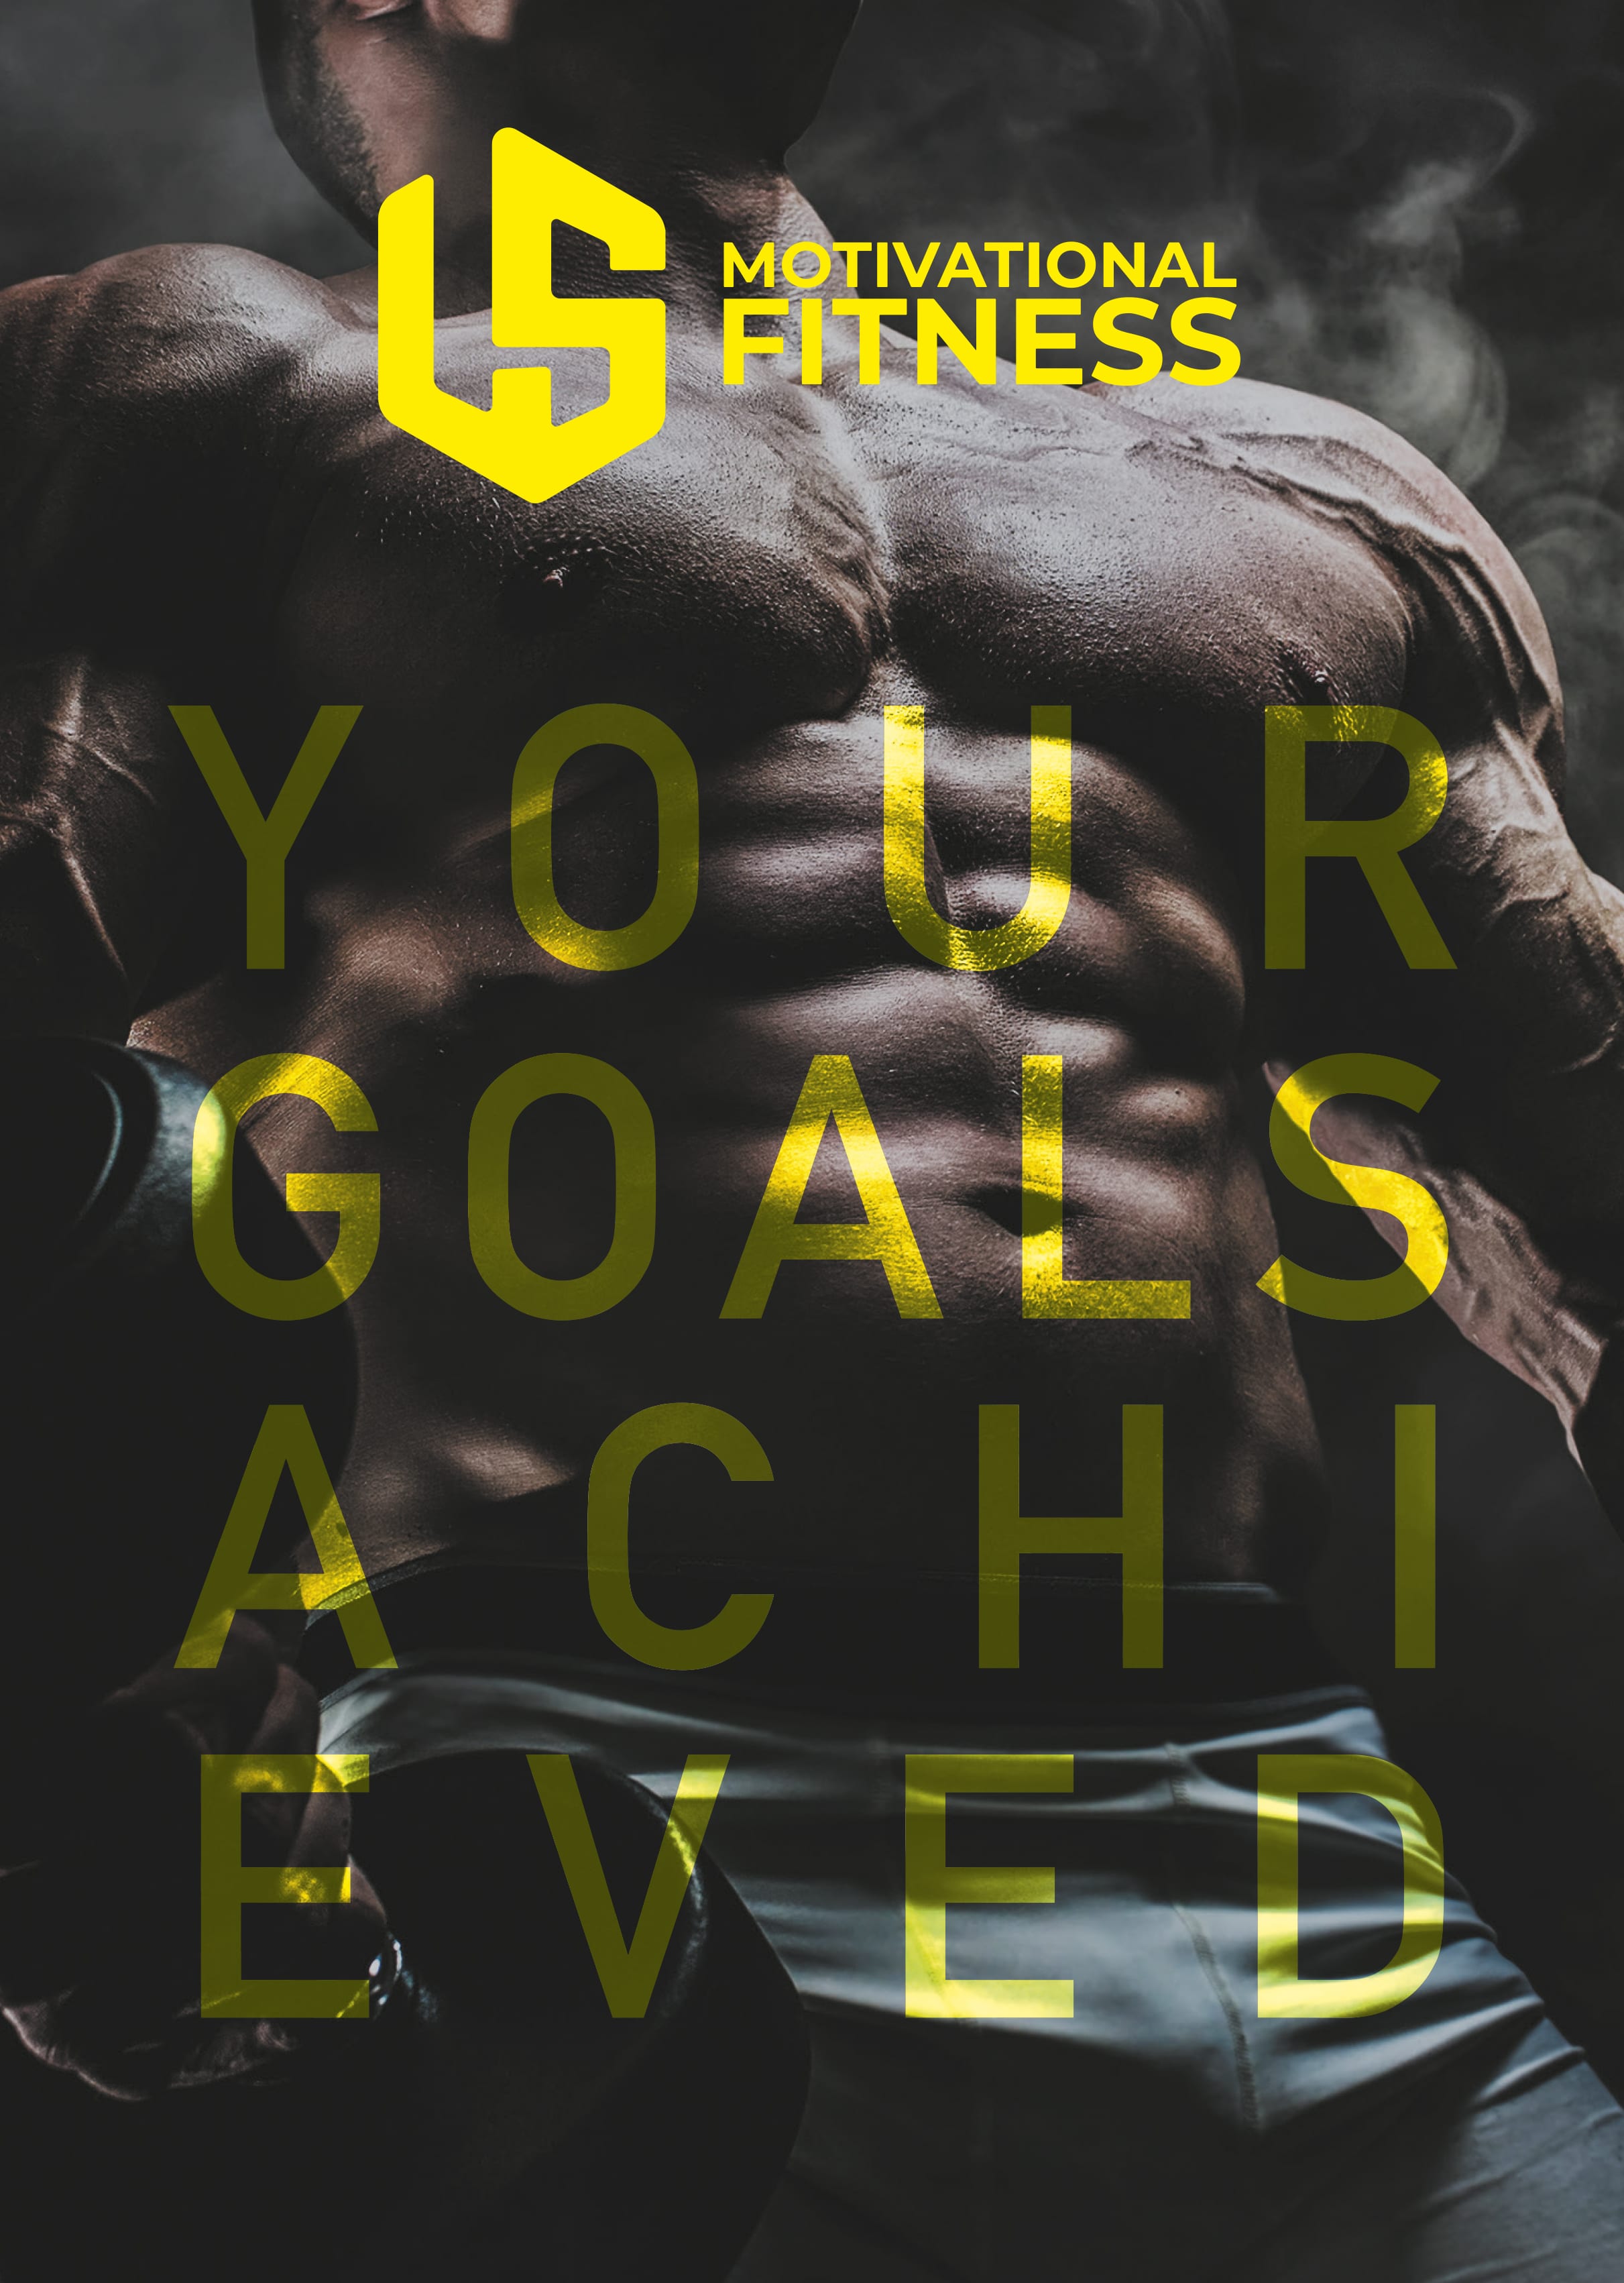 ls motivational fitness posters posters 2 1